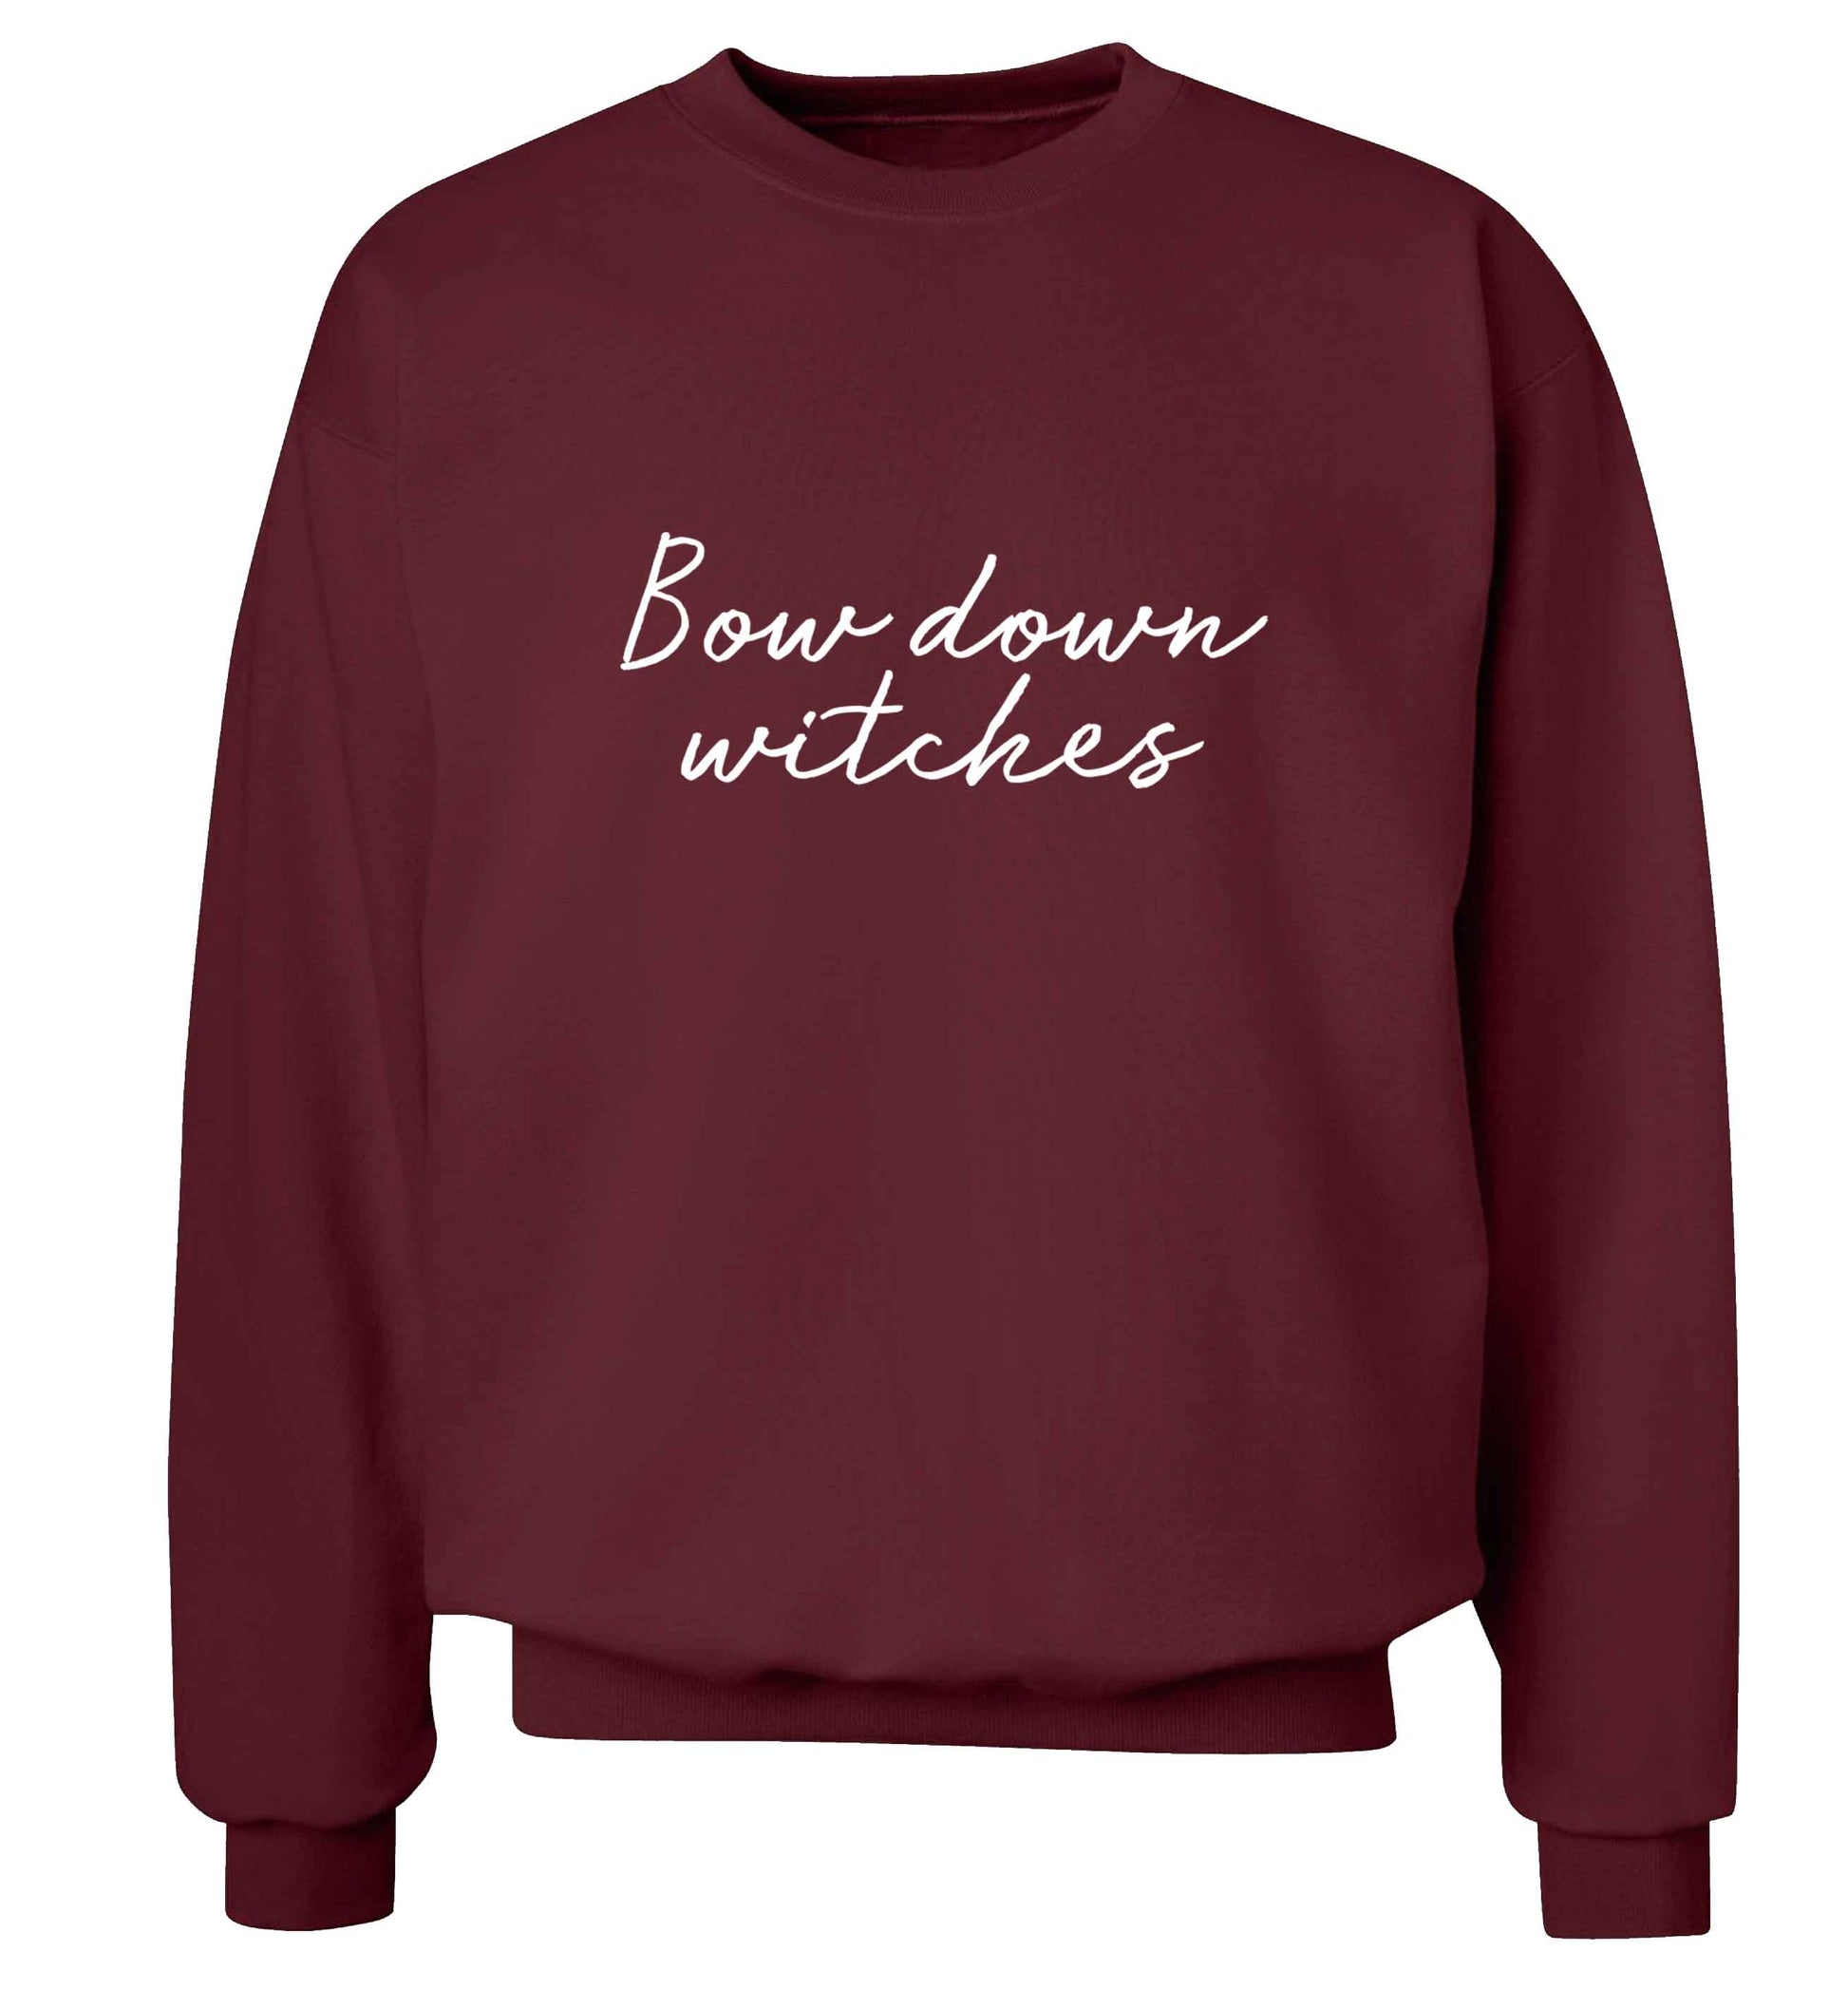 Bow down witches adult's unisex maroon sweater 2XL